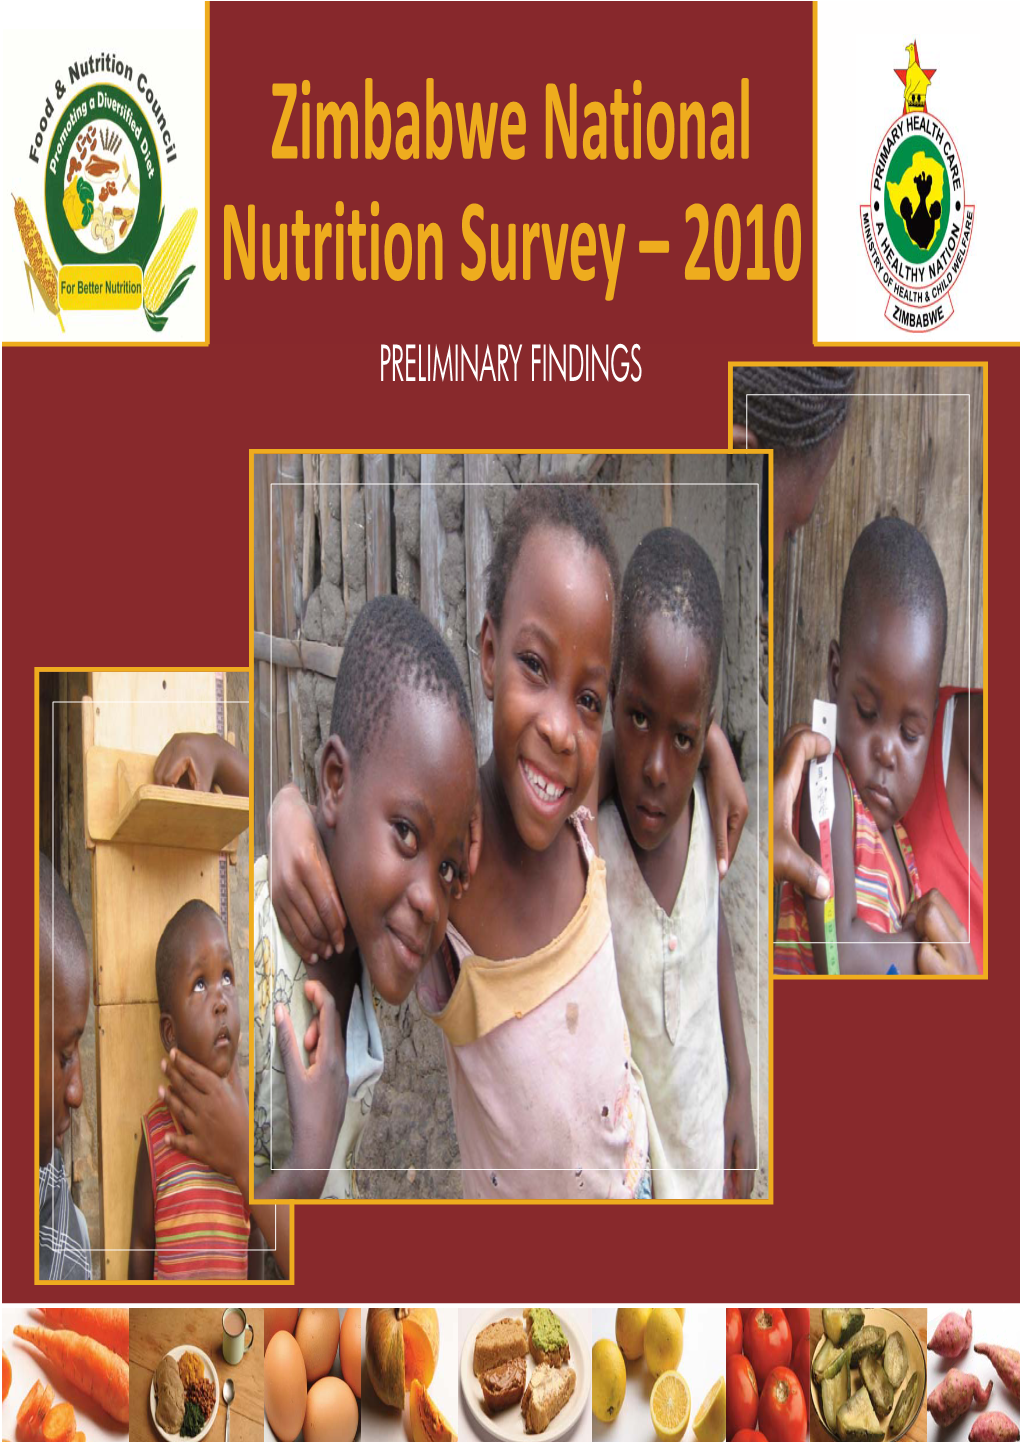 Zimbabwe National Nutrition Survey – 2010 PRELIMINARY FINDINGS Foreword